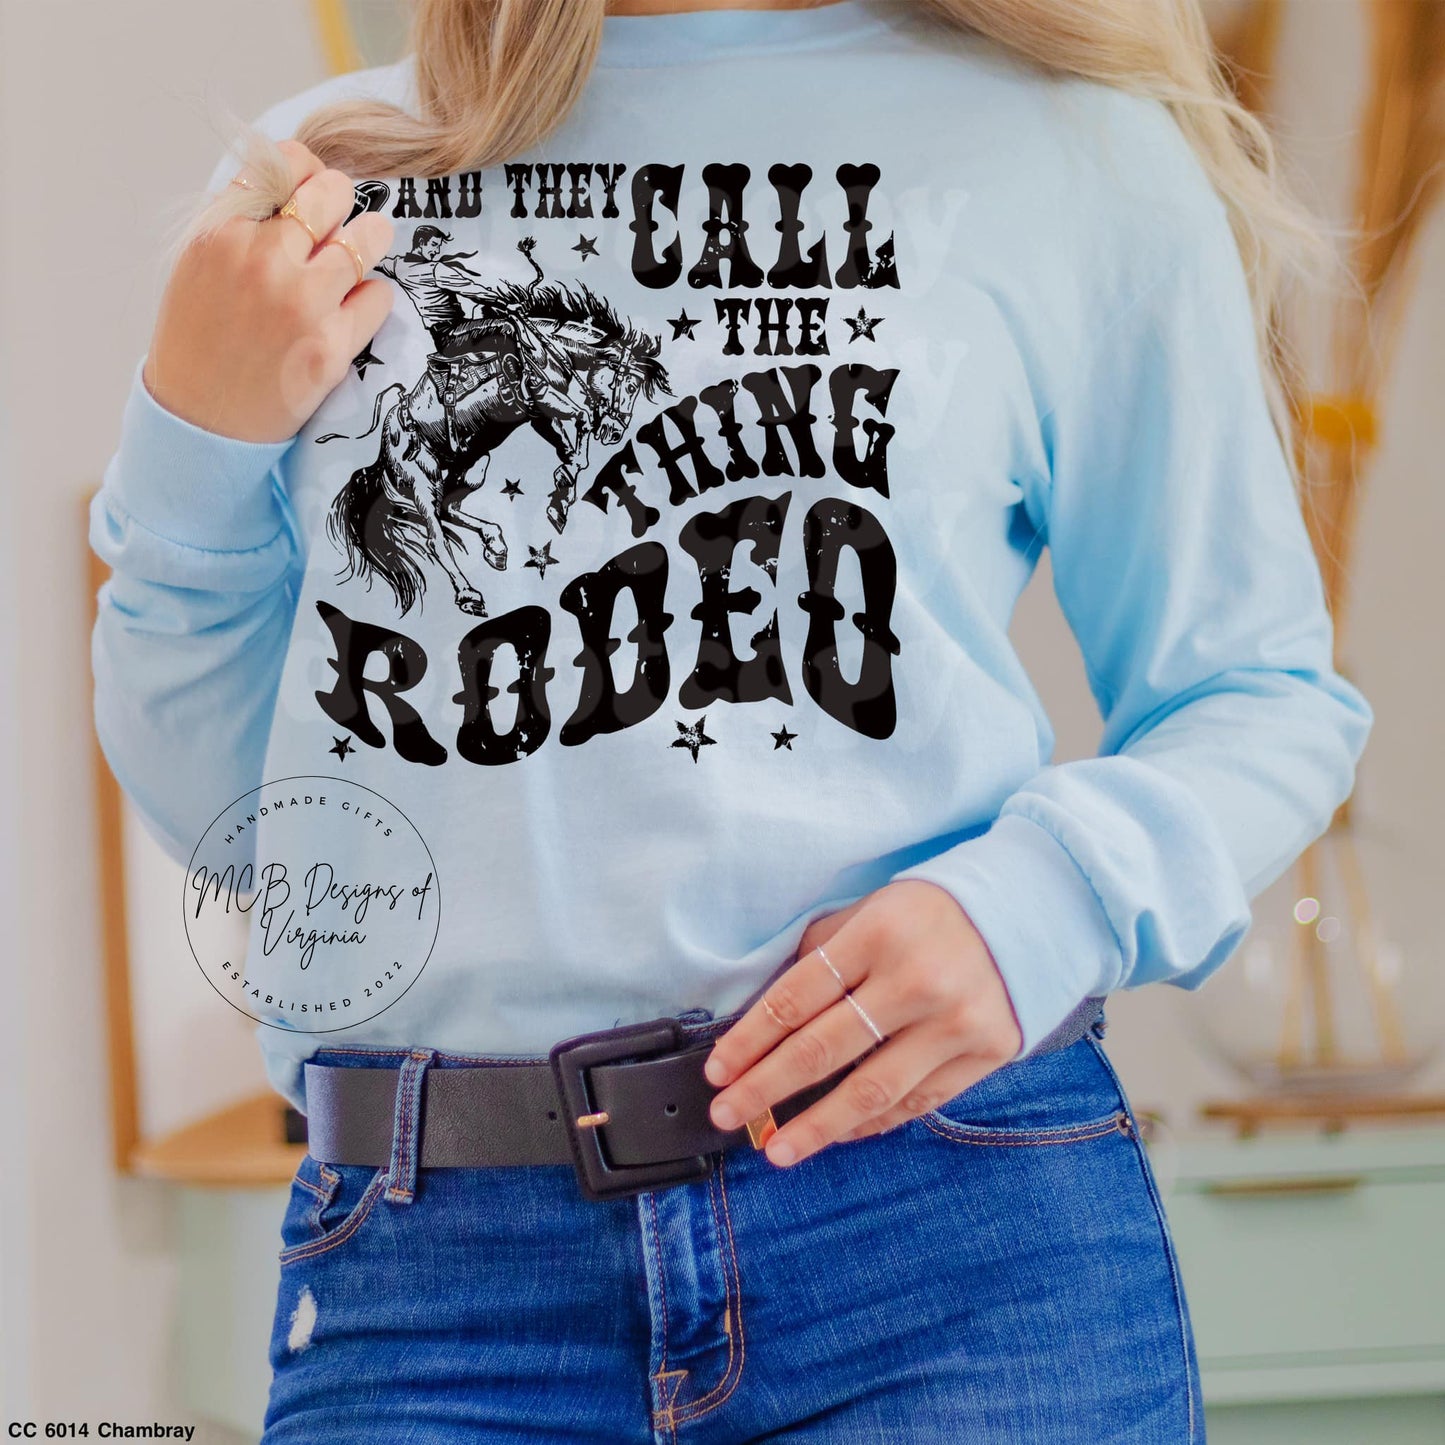 They Call The Thing Rodeo